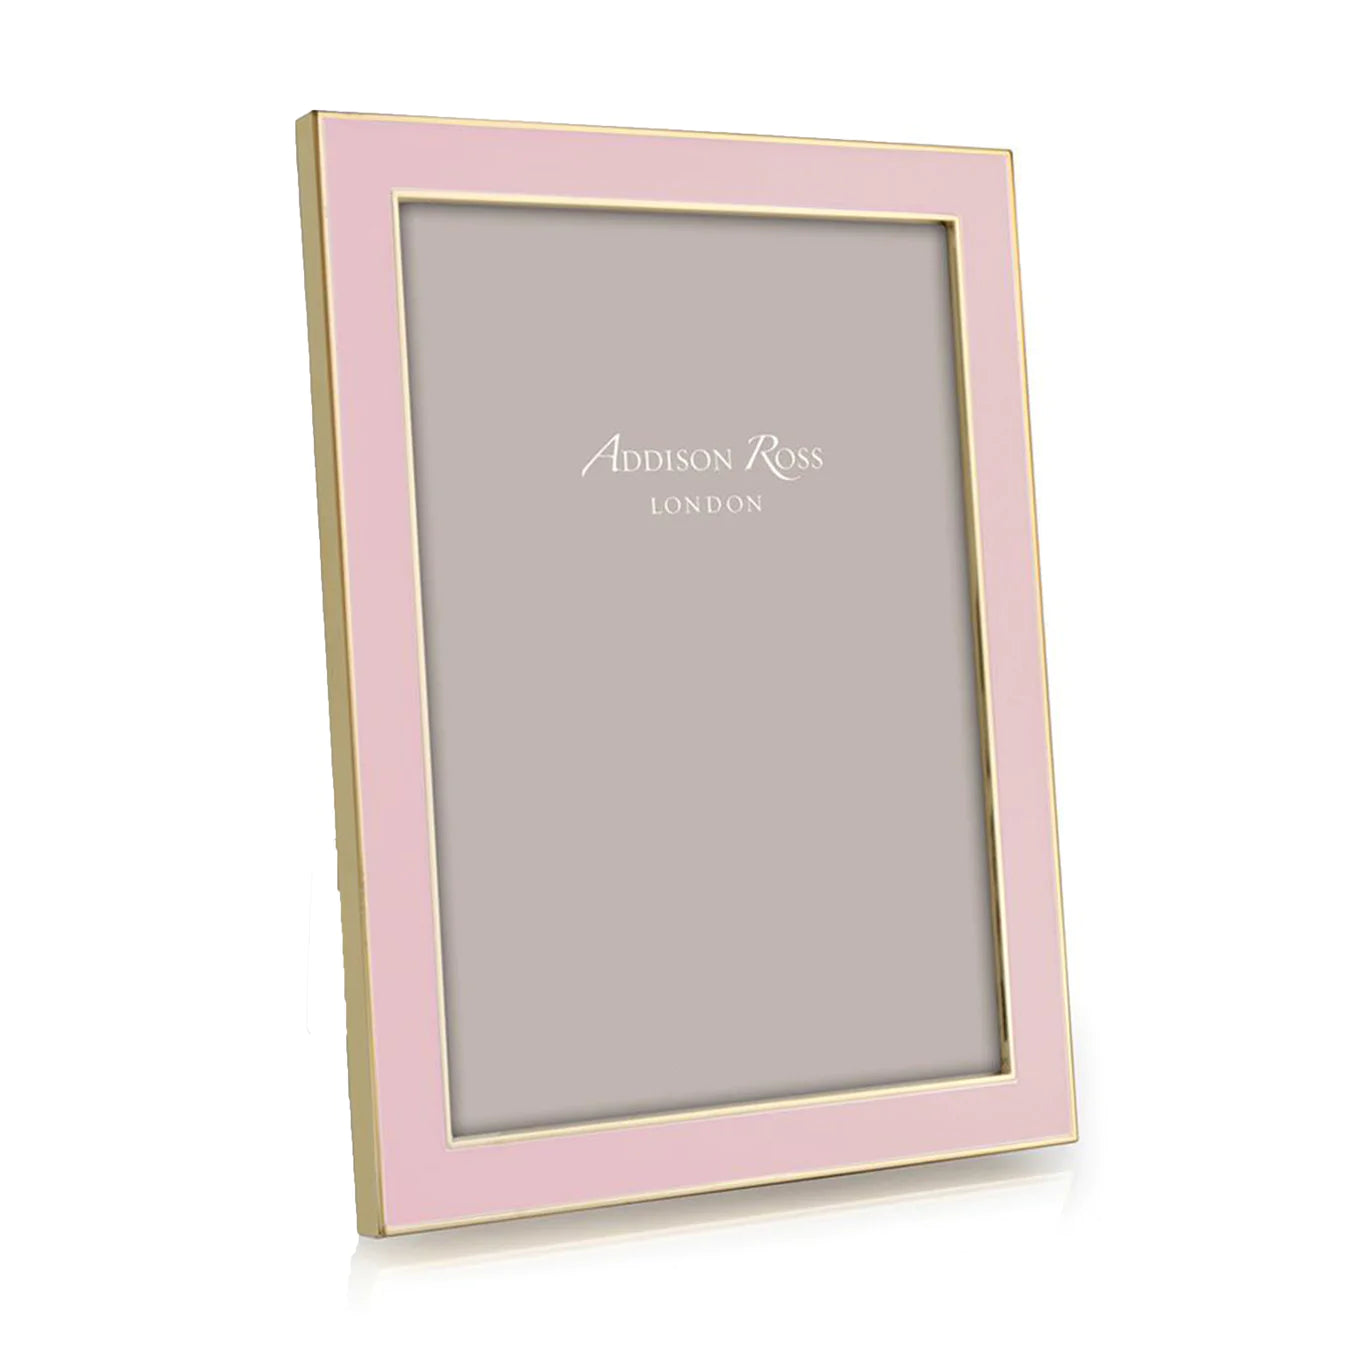 Pale Pink & Gold Enamel Picture Frame - 8x10 - The Preppy Bunny